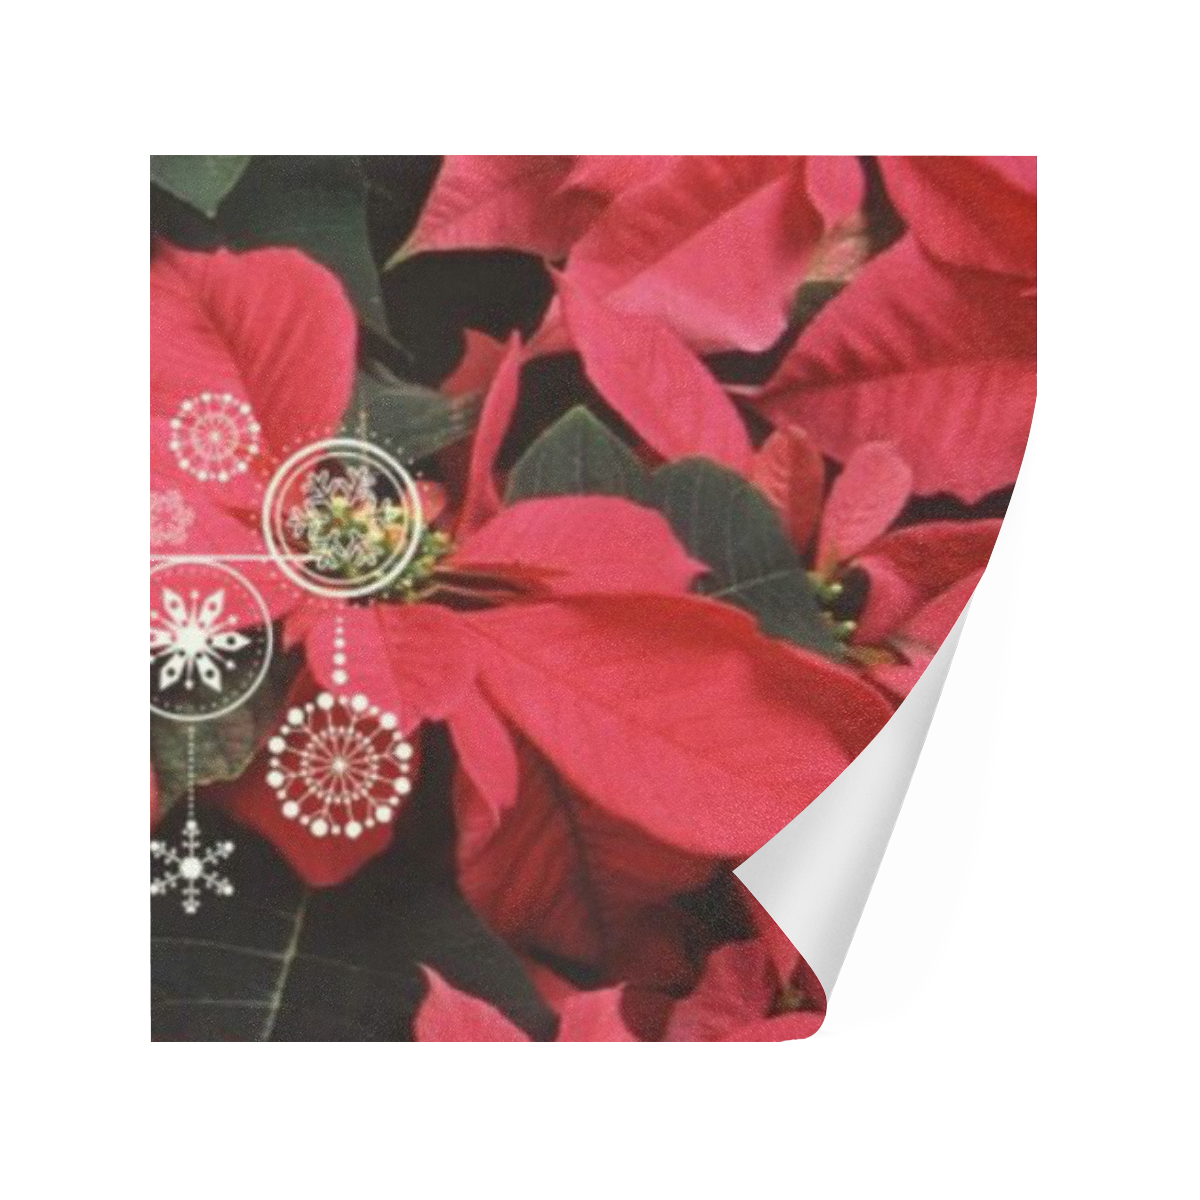 Poinsettia, merry christmas Gift Wrapping Paper 58"x 23" (5 Rolls)